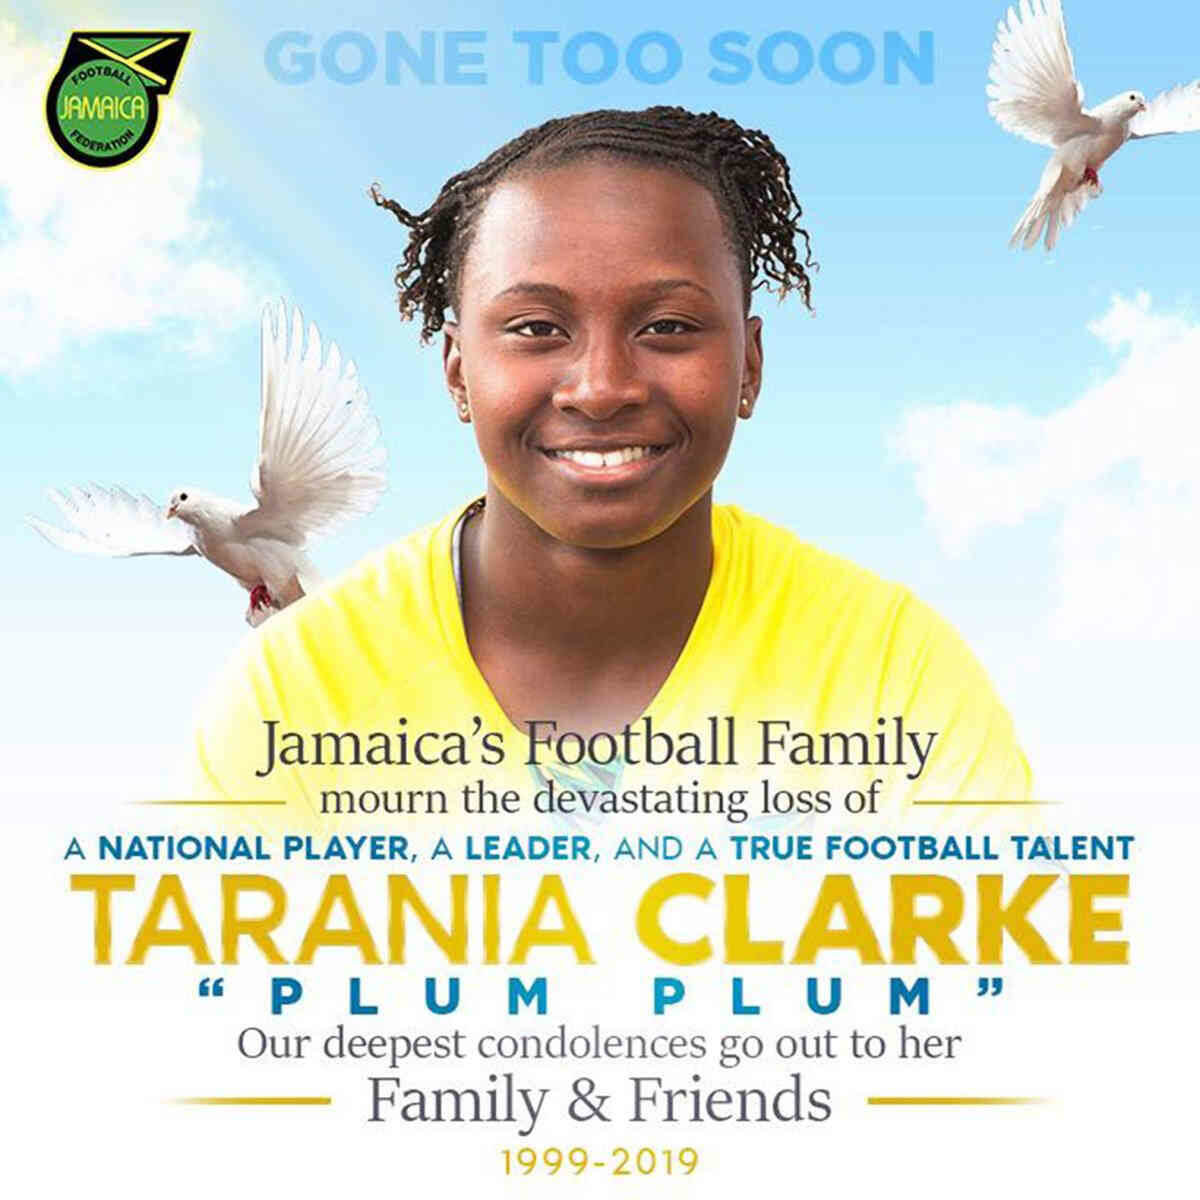 Reggae Girlz lost one of their own